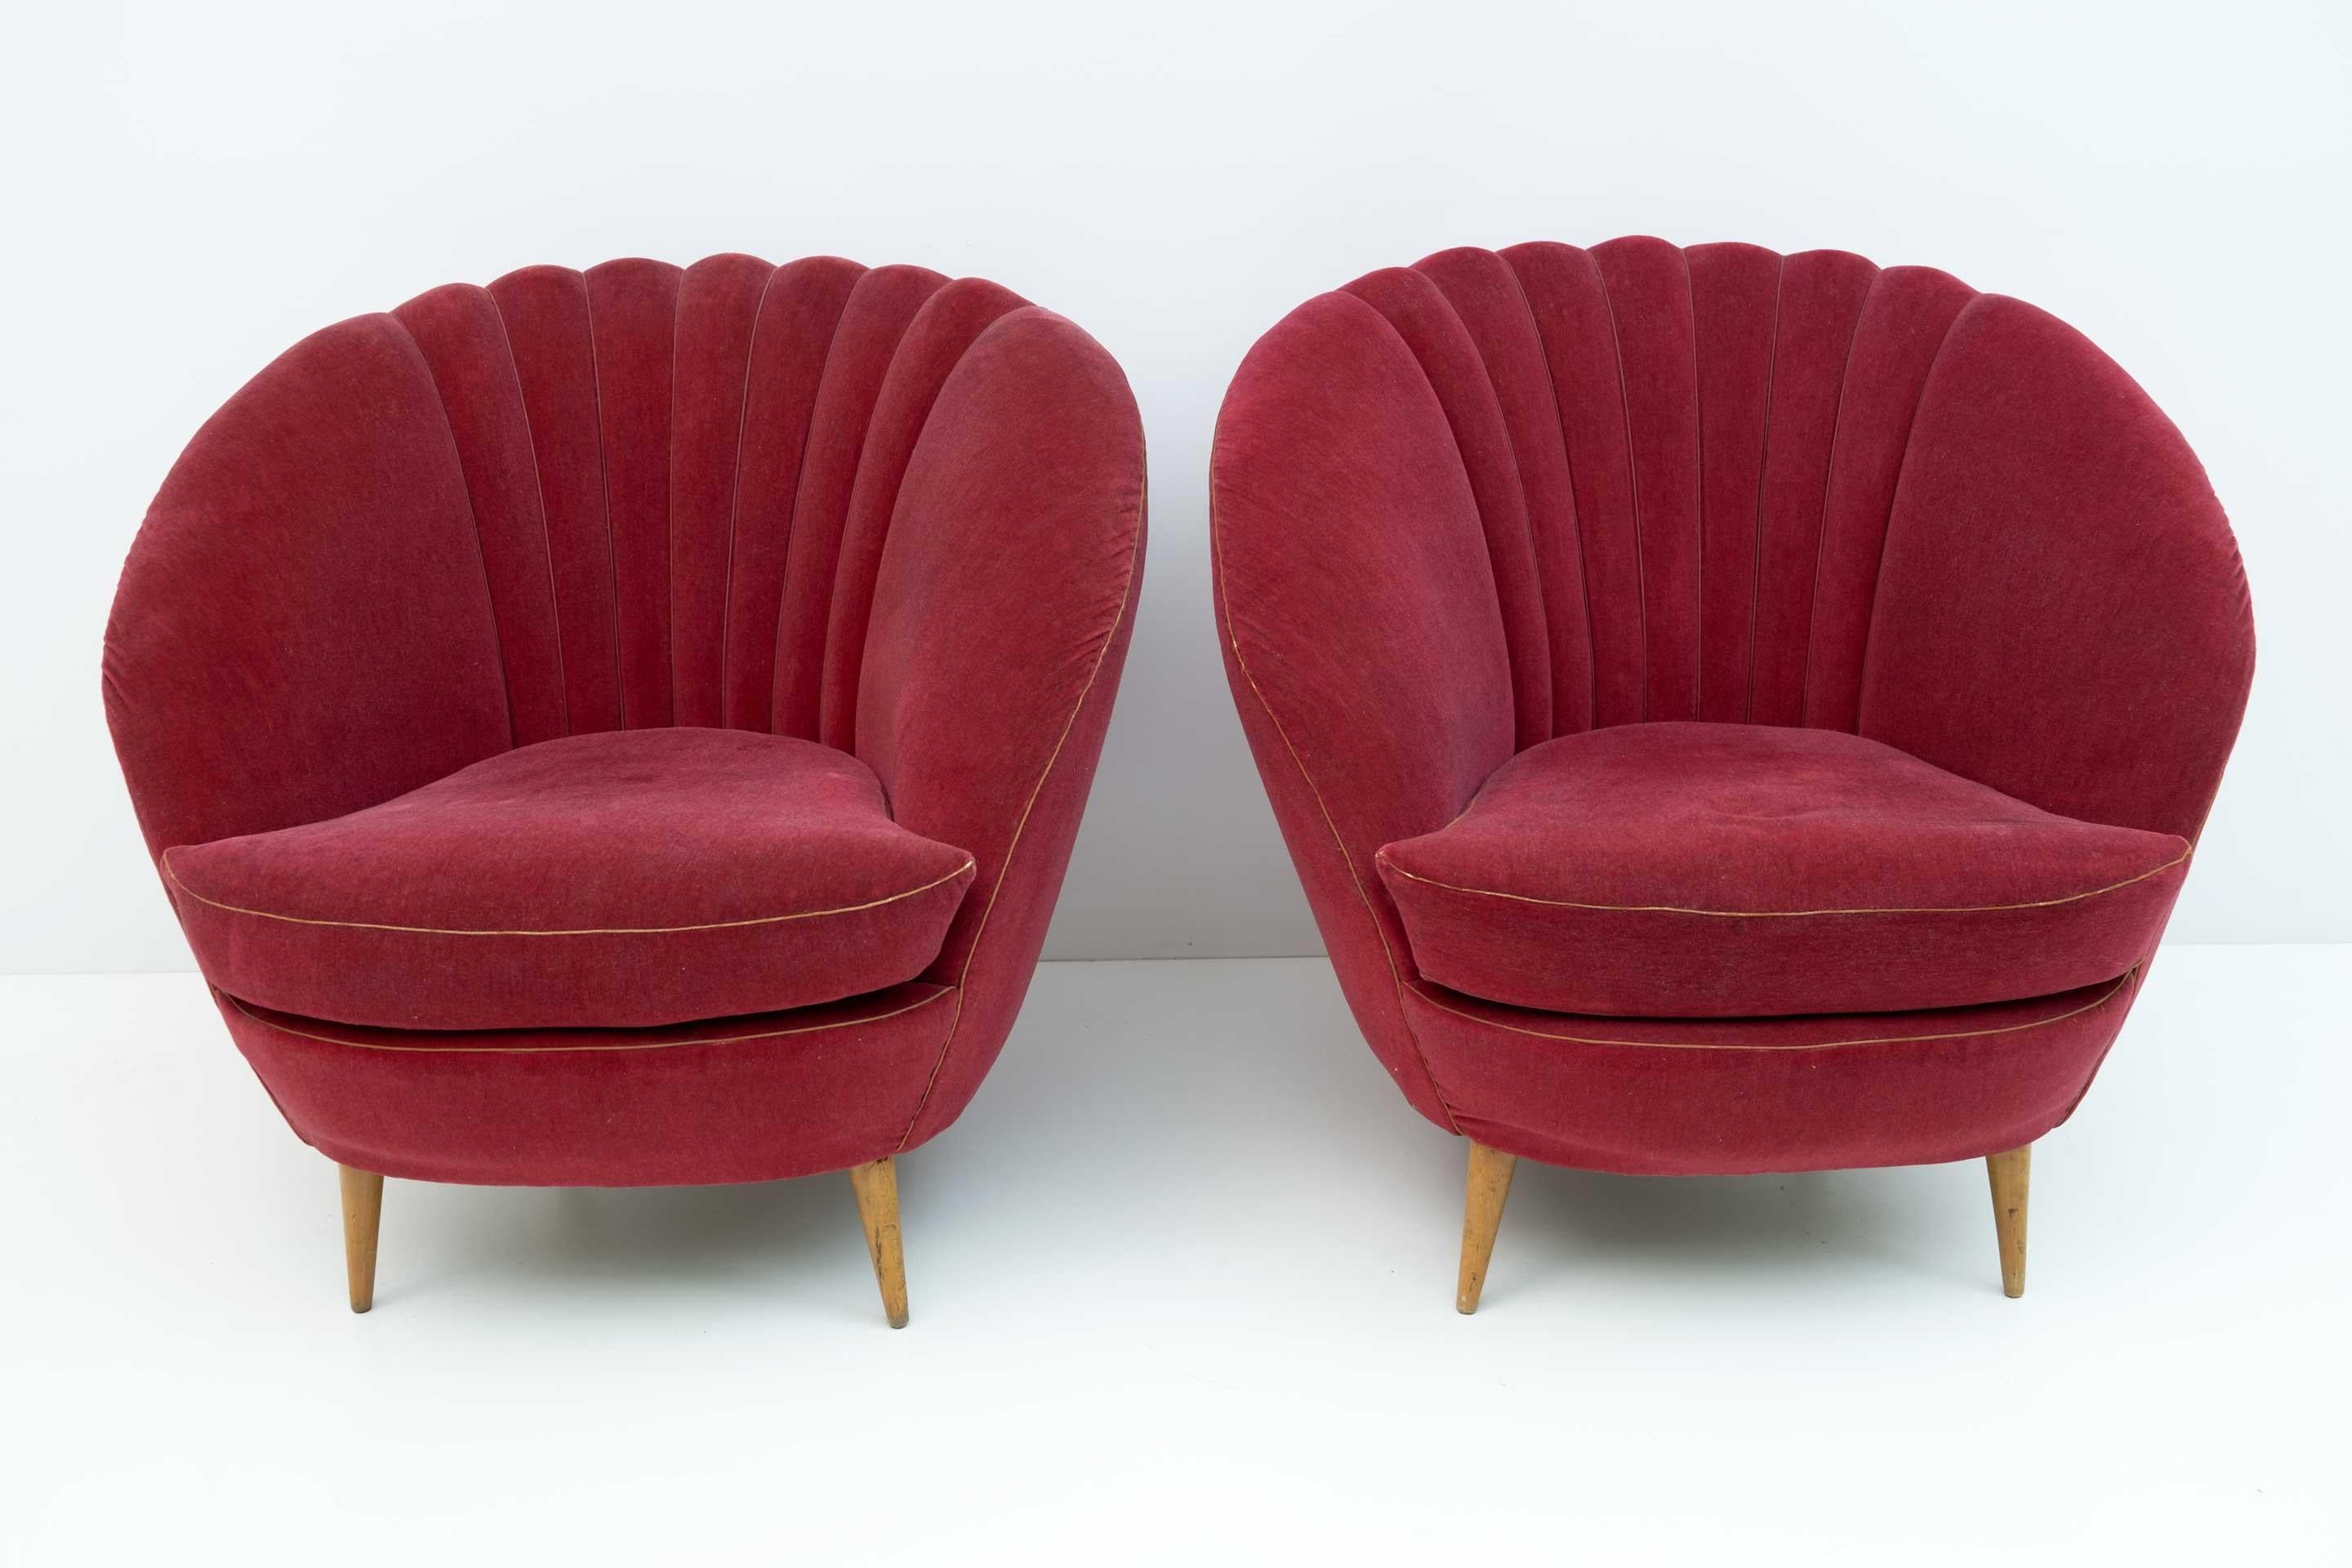 Margherita model armchair with wide and comfortable backrest, conical beech foot, upholstery in good condition, spring cushions.
The velvet is original from the period but a new upholstery is recommended.
Attributed Gio Ponti and produced by